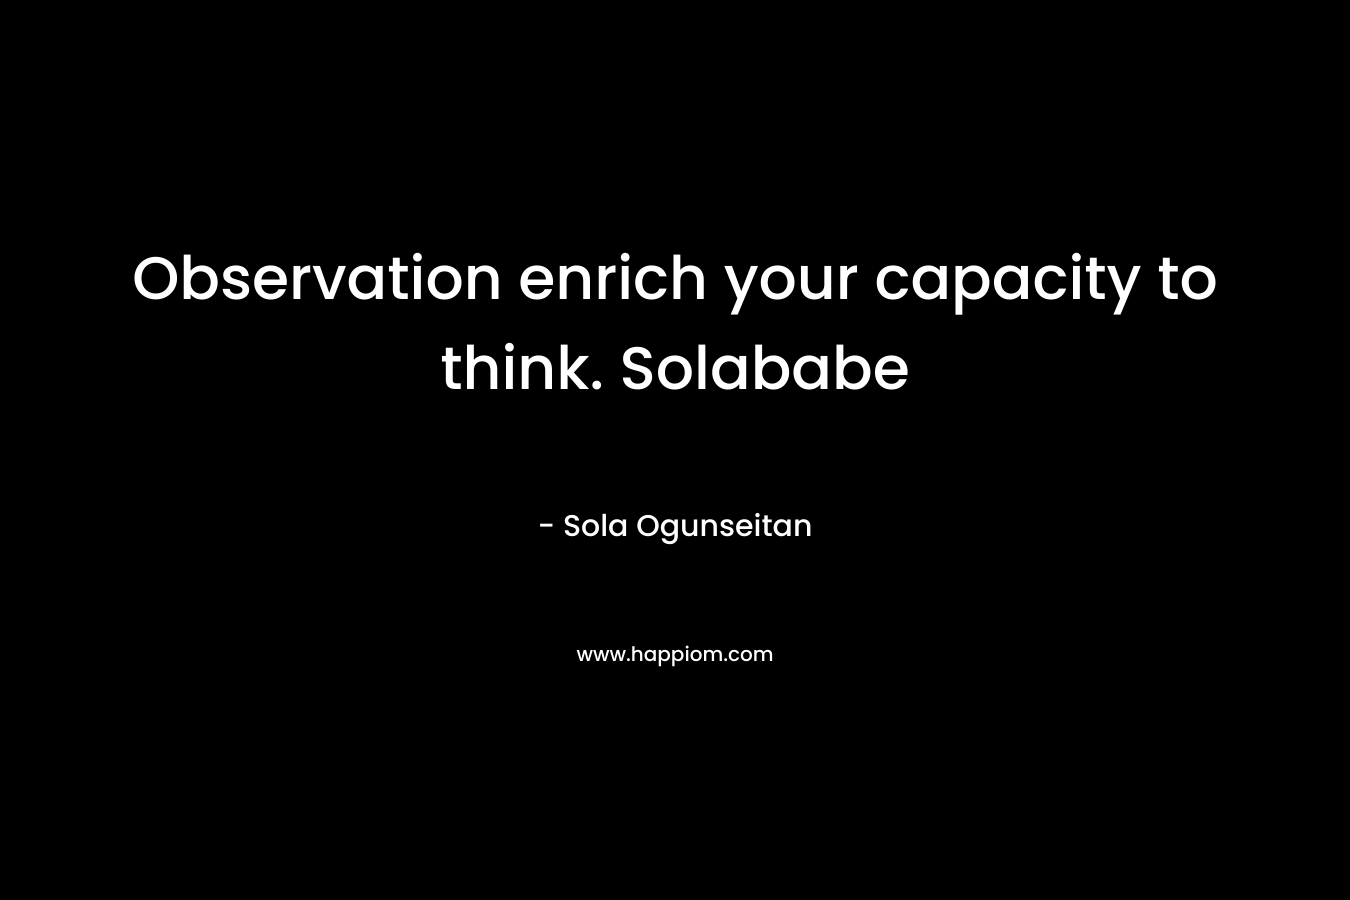 Observation enrich your capacity to think. Solababe